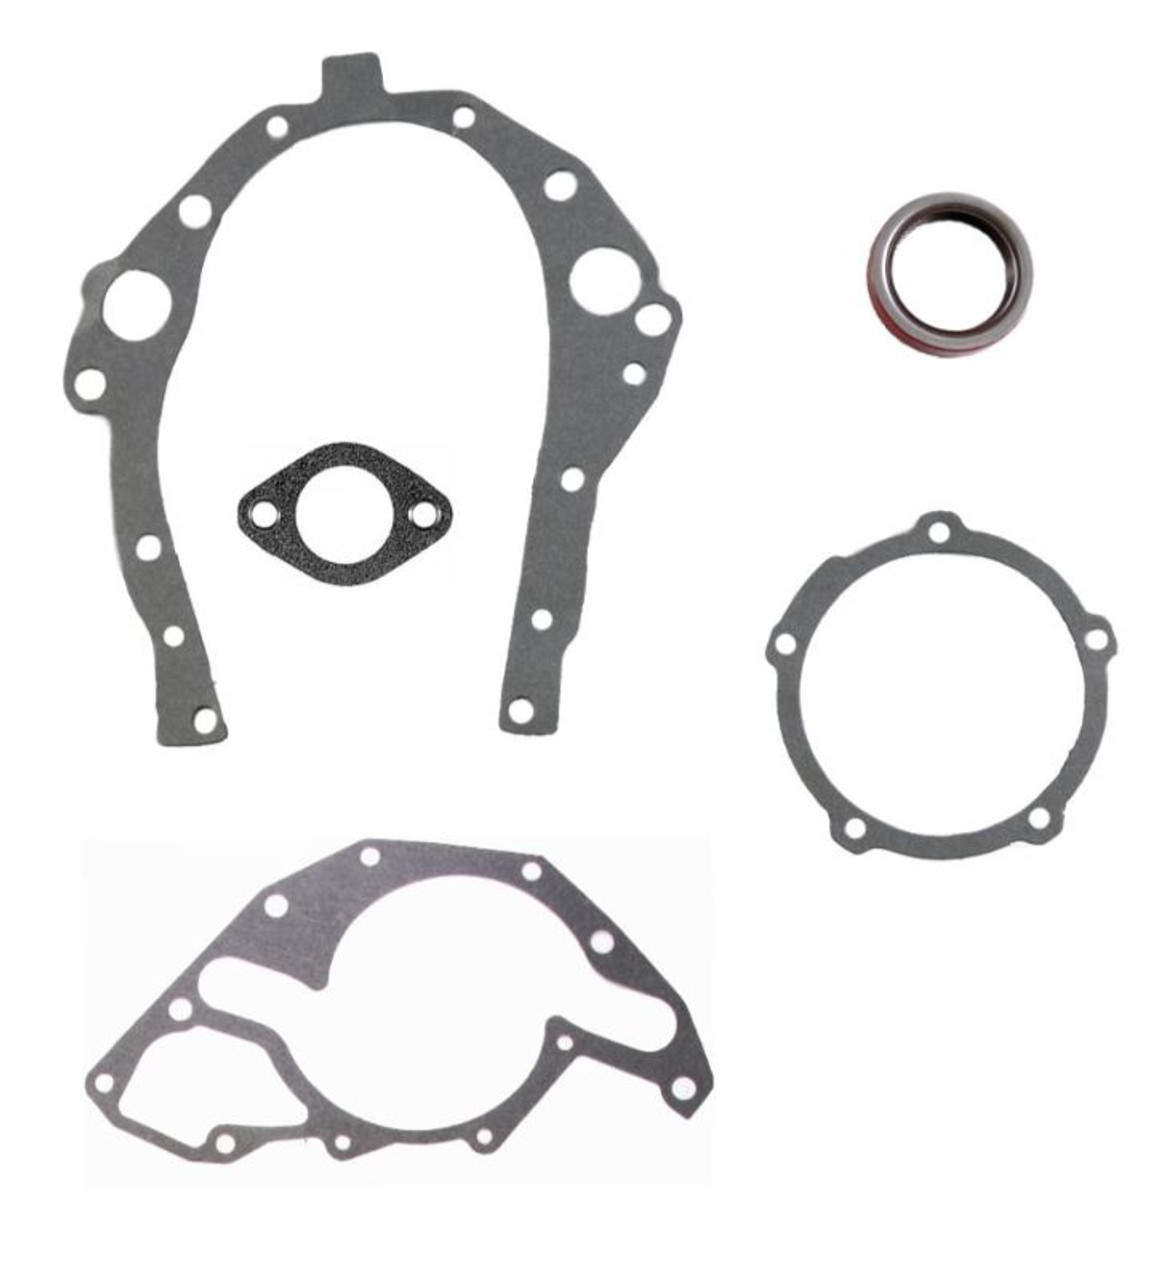 2003 Buick Century 3.1L Engine Timing Cover Gasket Set TCC189-A -234